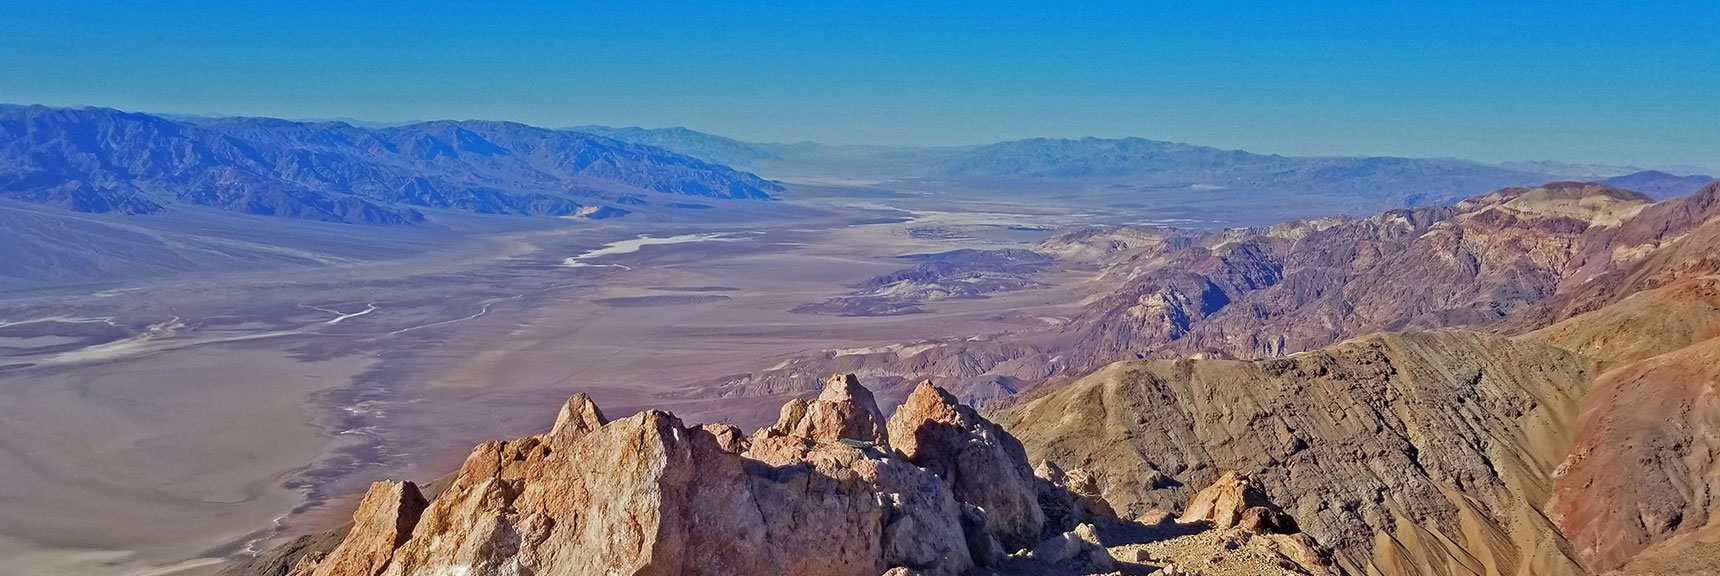 Northwestern View from Dante's Ridge | Dante's View to Mt. Perry | Death Valley National Park, CA